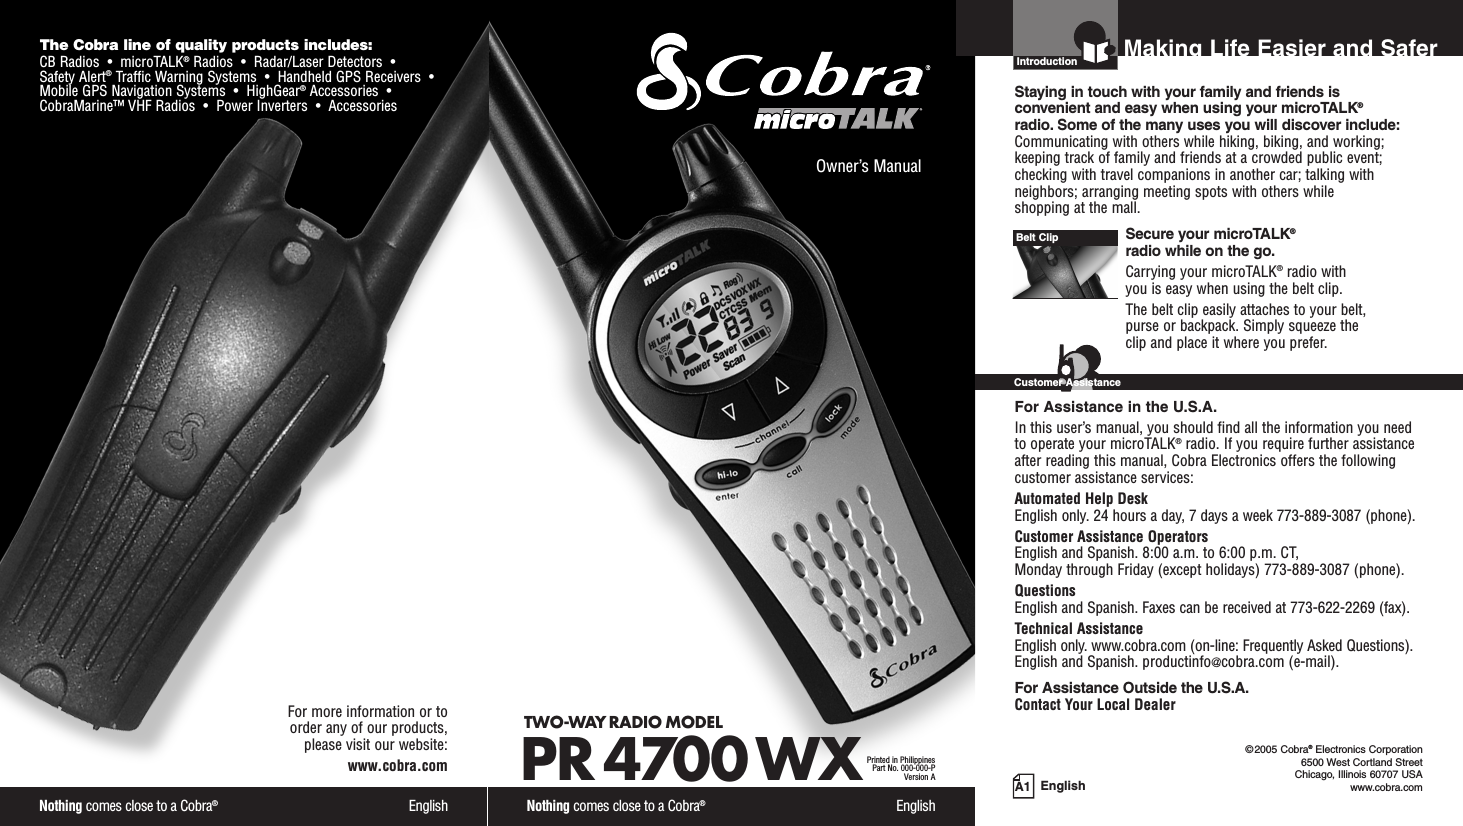 Nothing comes close to a Cobra®EnglishThe Cobra line of quality products includes:CB Radios  •  microTALK®Radios  •  Radar/Laser Detectors  •Safety Alert®Traffic Warning Systems  •  Handheld GPS Receivers  •Mobile GPS Navigation Systems  •  HighGear®Accessories  •CobraMarine™ VHF Radios  •  Power Inverters  •  AccessoriesFor more information or to order any of our products, please visit our website:www.cobra.comA1 EnglishMaking Life Easier and SaferOwner’s ManualNothing comes close to a Cobra®EnglishTWO-WAY RADIO MODEL PR 4700 WXPrinted in PhilippinesPart No. 000-000-PVersion AIntroductionStaying in touch with your family and friends is convenient and easy when using your microTALK®radio. Some of the many uses you will discover include:Communicating with others while hiking, biking, and working;keeping track of family and friends at a crowded public event;checking with travel companions in another car; talking withneighbors; arranging meeting spots with others while shopping at the mall.Secure your microTALK®radio while on the go.Carrying your microTALK®radio with you is easy when using the belt clip. The belt clip easily attaches to your belt, purse or backpack. Simply squeeze the clip and place it where you prefer.For Assistance in the U.S.A.In this user’s manual, you should find all the information you needto operate your microTALK®radio. If you require further assistanceafter reading this manual, Cobra Electronics offers the followingcustomer assistance services:Automated Help Desk English only. 24 hours a day, 7 days a week 773-889-3087 (phone). Customer Assistance OperatorsEnglish and Spanish. 8:00 a.m. to 6:00 p.m. CT, Monday through Friday (except holidays) 773-889-3087 (phone). QuestionsEnglish and Spanish. Faxes can be received at 773-622-2269 (fax). Technical AssistanceEnglish only. www.cobra.com (on-line: Frequently Asked Questions). English and Spanish. productinfo@cobra.com (e-mail).For Assistance Outside the U.S.A.Contact Your Local DealerBelt ClipCustomer Assistance©2005 Cobra®Electronics Corporation6500 West Cortland StreetChicago, Illinois 60707 USAwww.cobra.com 